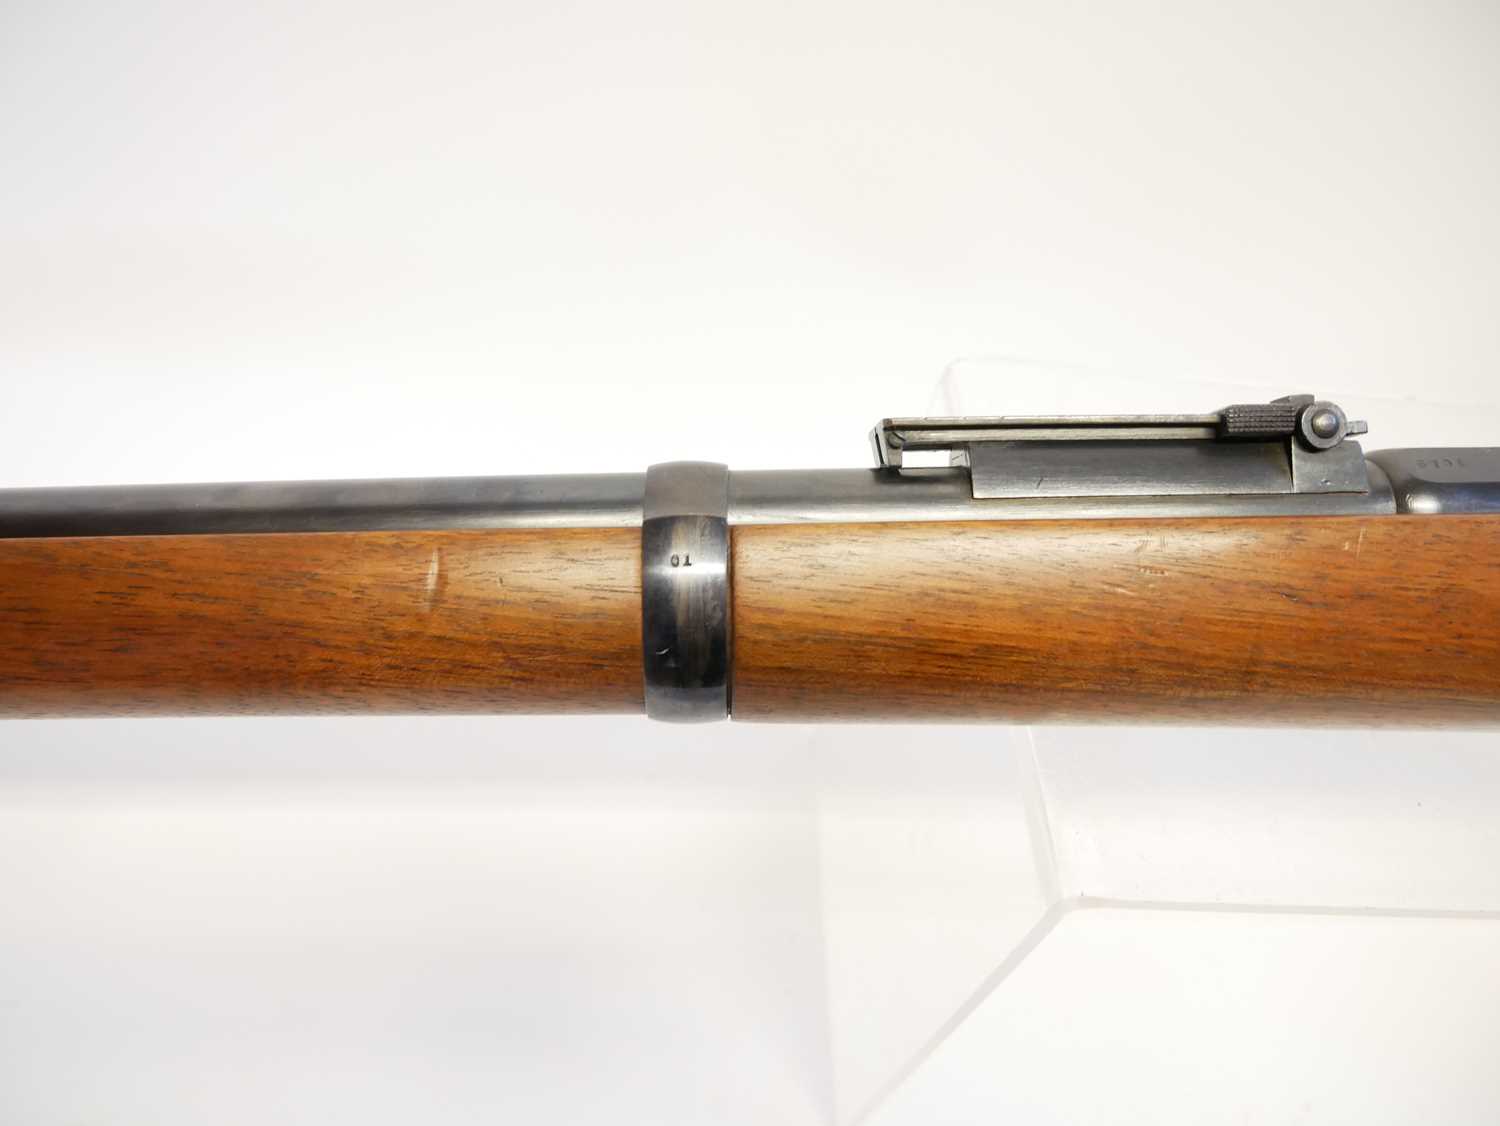 Mauser M1871/84 bolt action rifle 11 x 60R / .43 calibre, matching serial numbers 6701, 30.5" barrel - Image 19 of 20